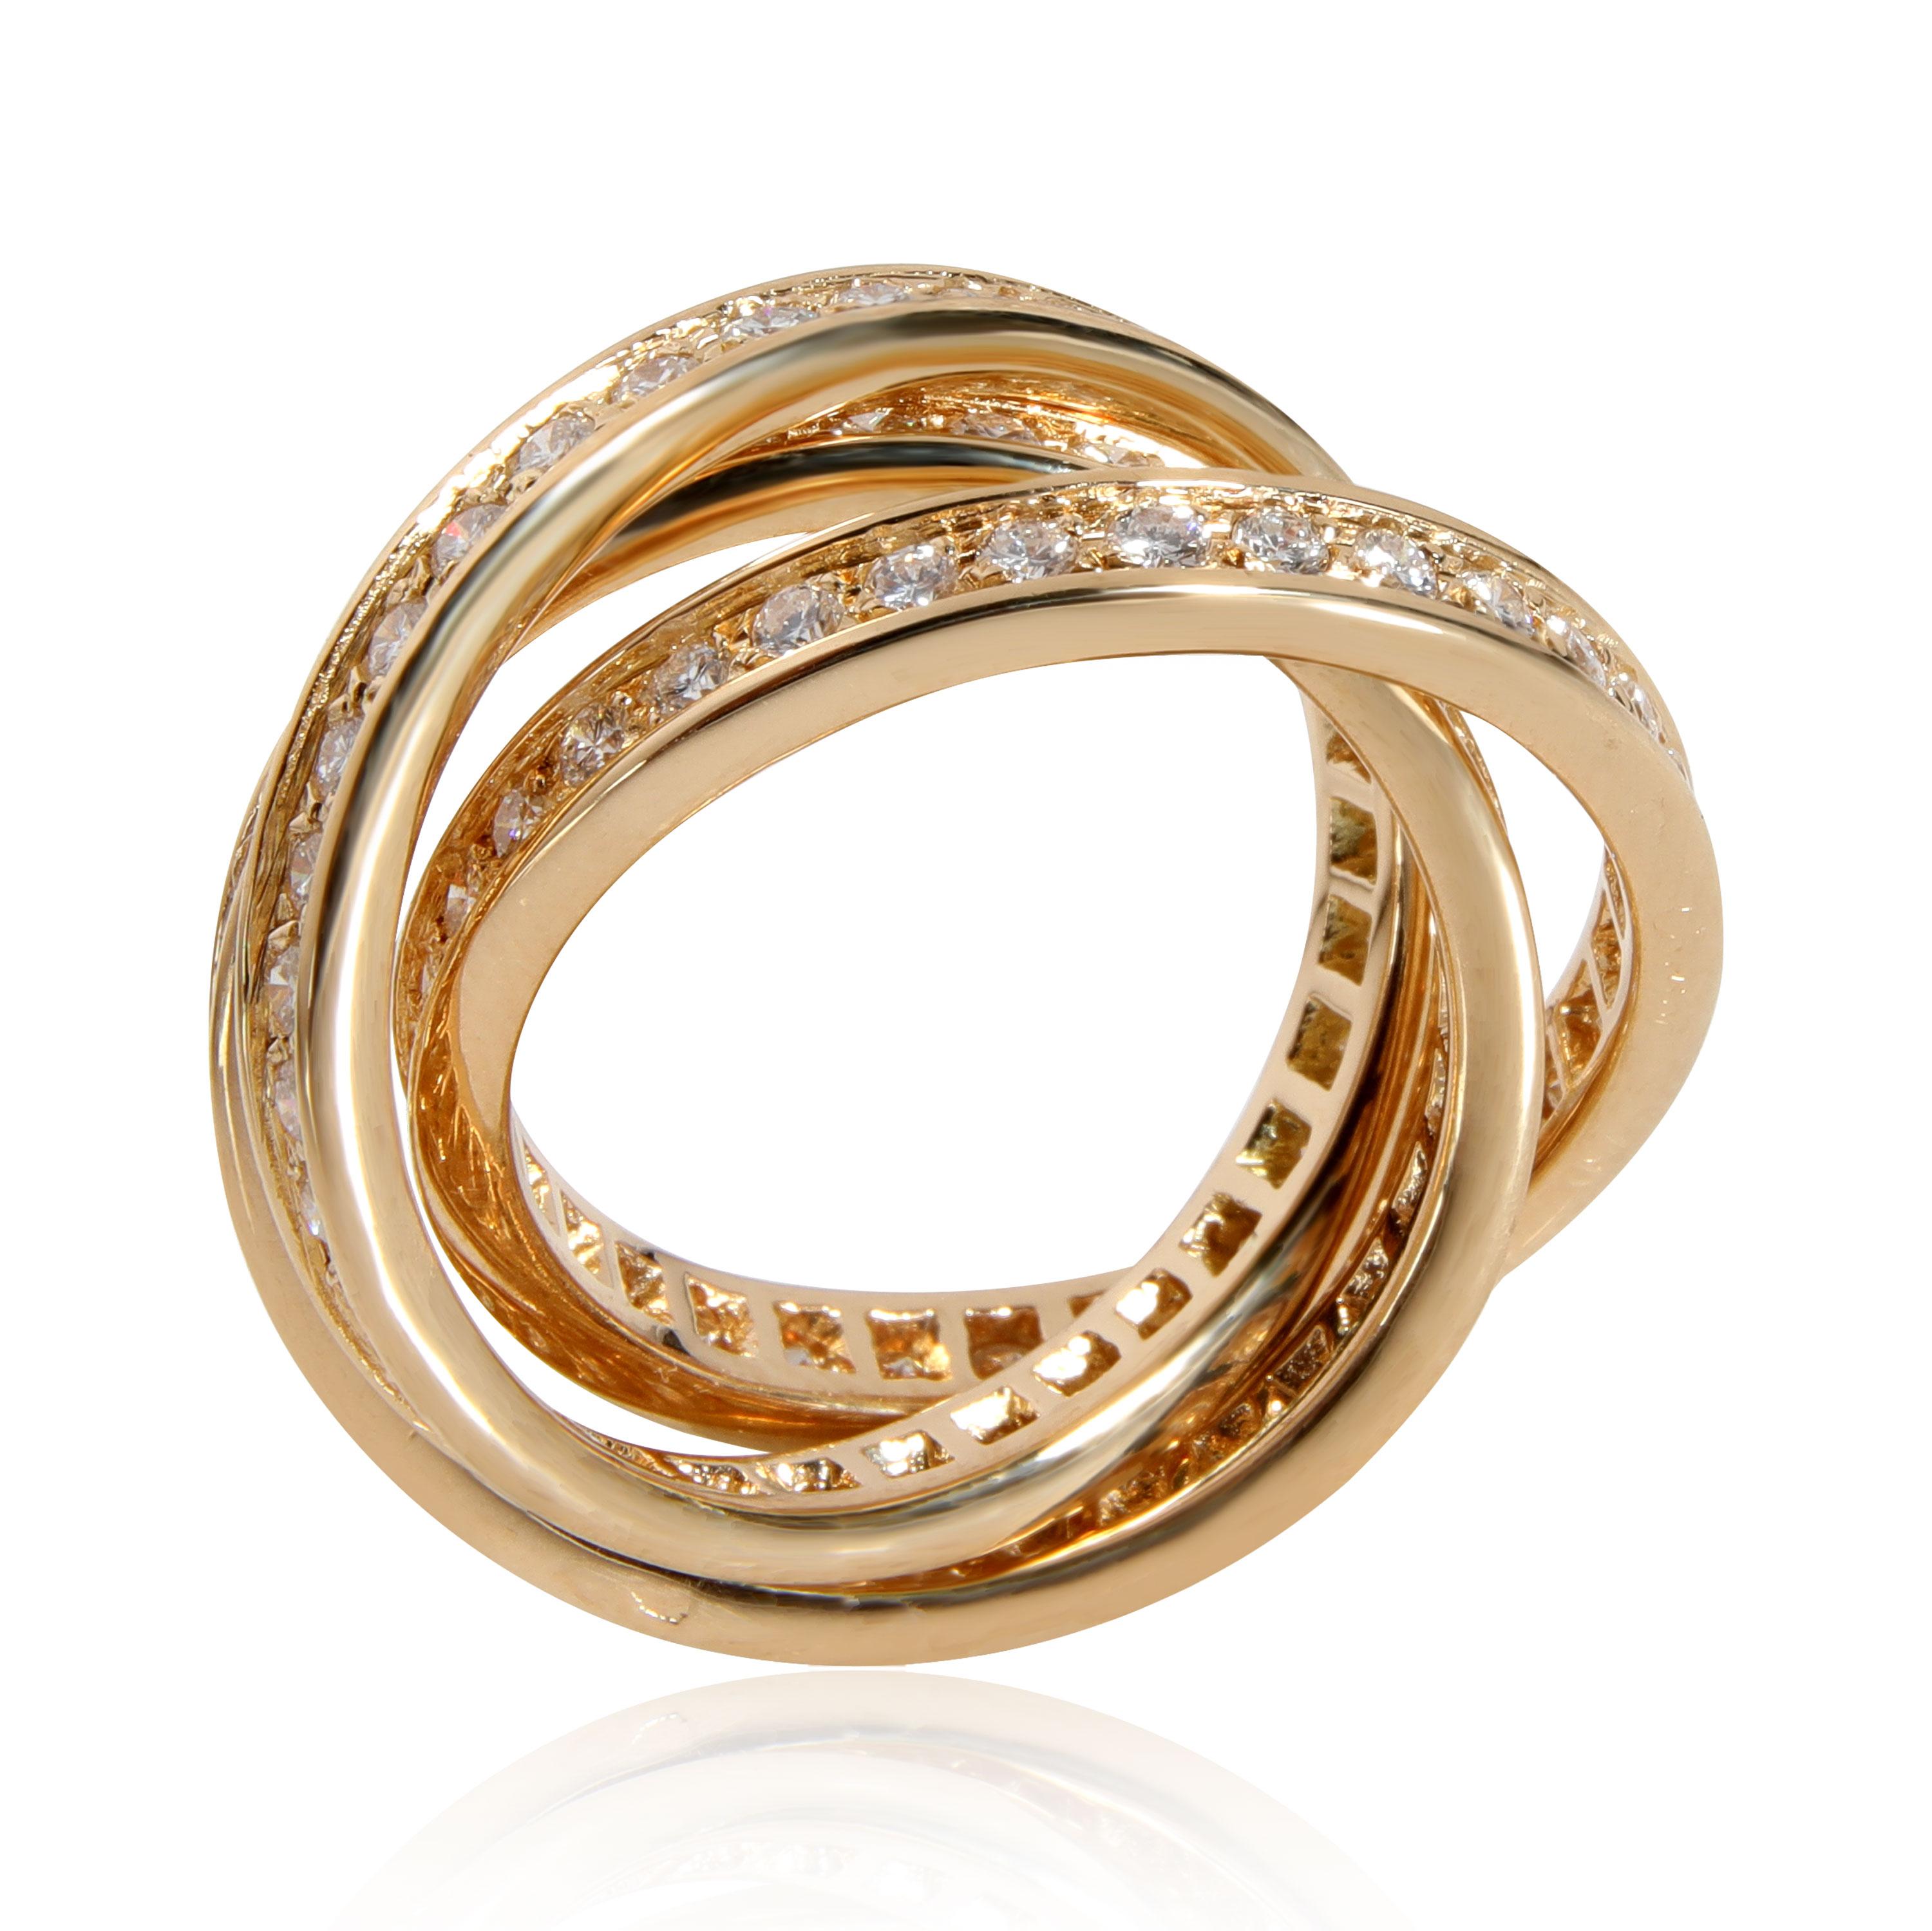 Cartier Trinity Diamond Ring in 18K Yellow Gold 1.5 CTW

PRIMARY DETAILS
SKU: 111568
Listing Title: Cartier Trinity Diamond Ring in 18K Yellow Gold 1.5 CTW
Condition Description: Retails for 14,500 USD. In excellent condition and recently polished.